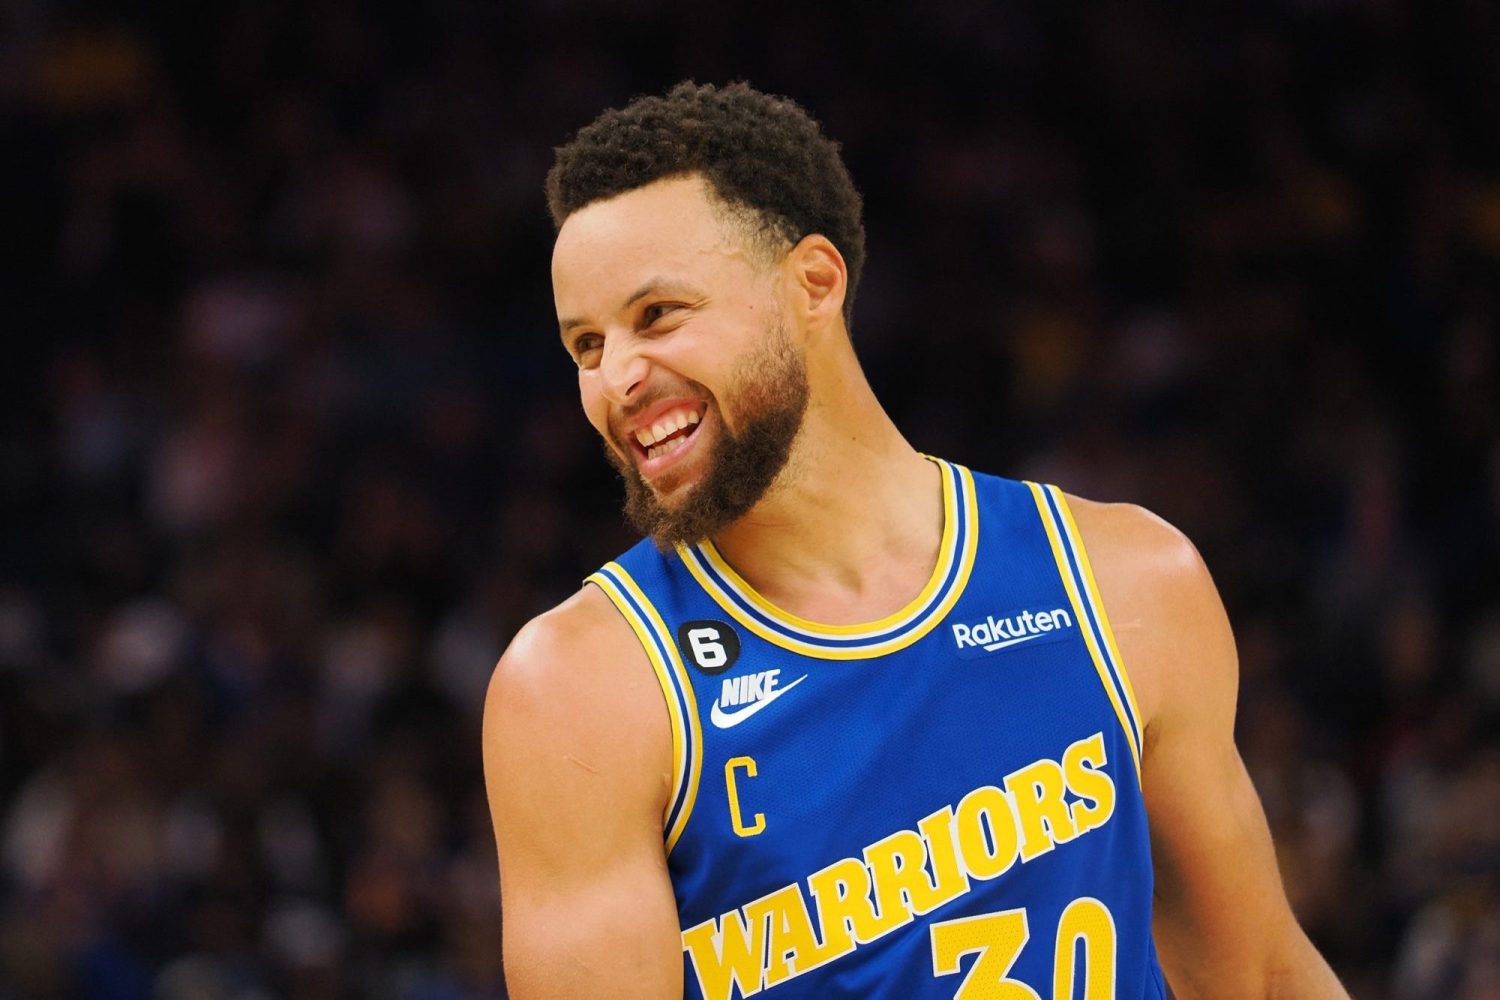 Golden State Warriors point guard Stephen Curry smiles between plays against the San Antonio Spurs during the second quarter at Chase Center.